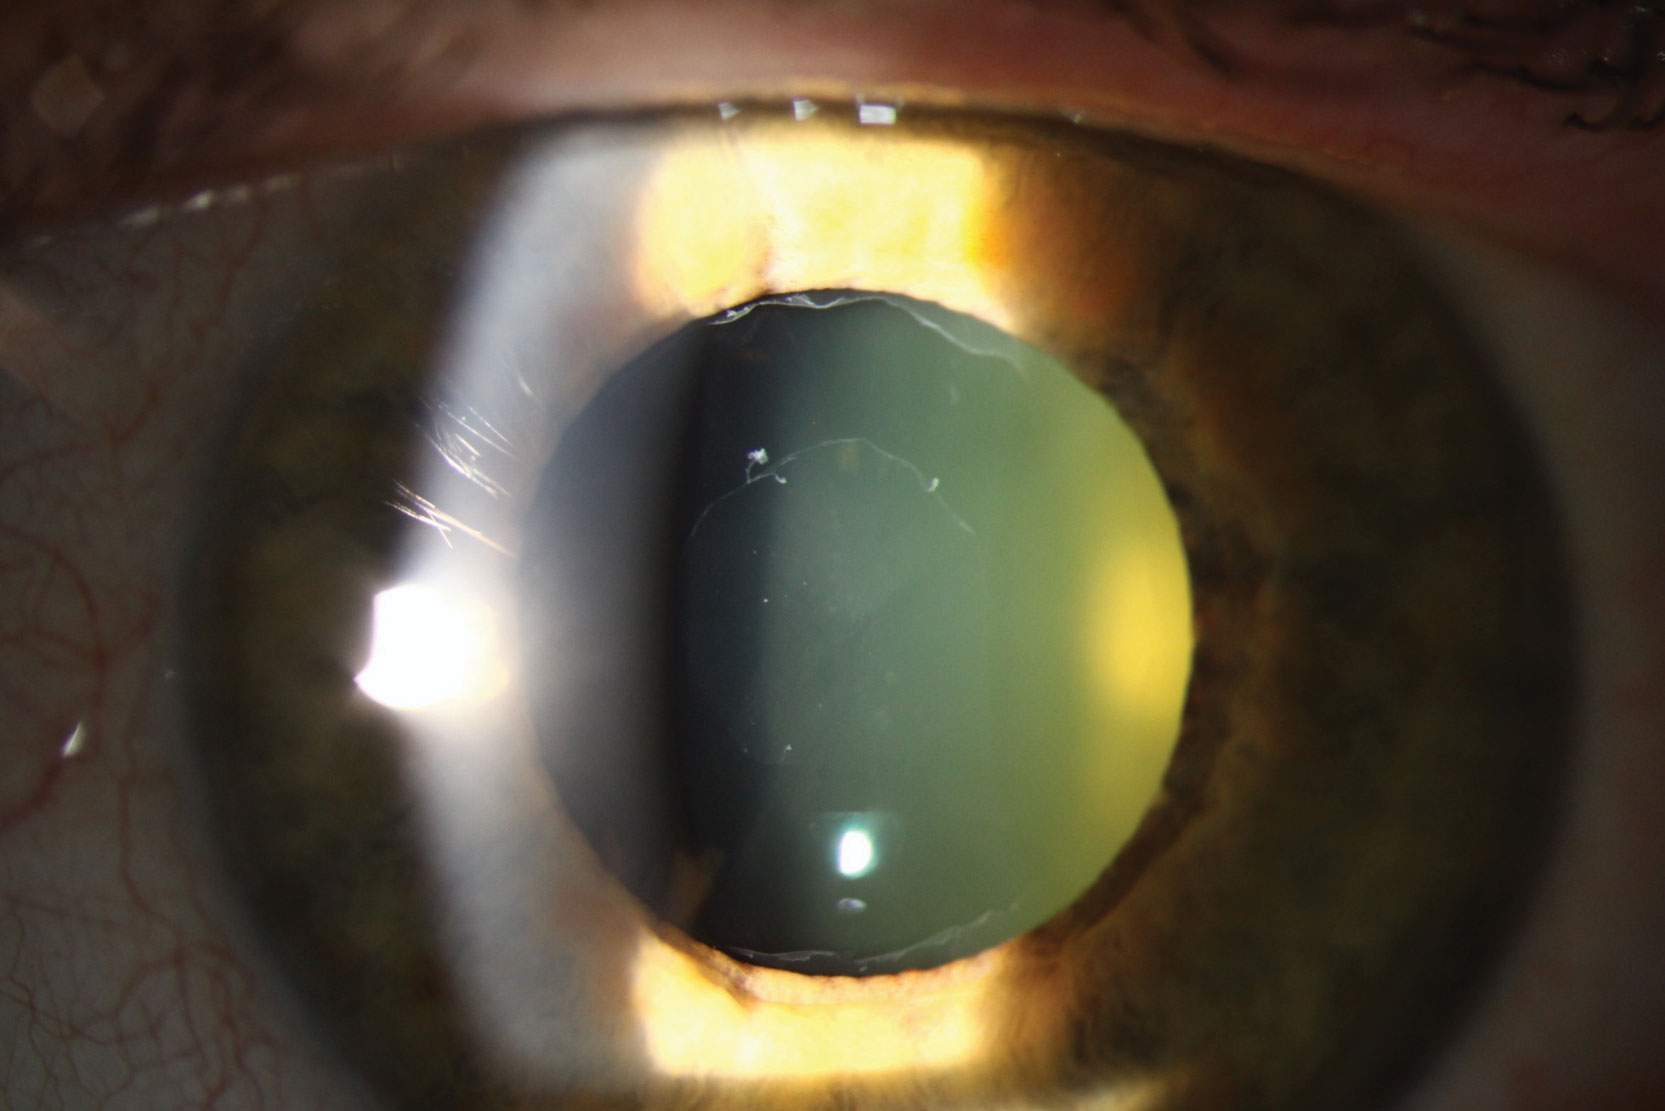 This patient was diagnosed with PXF, a risk factor for glaucoma.